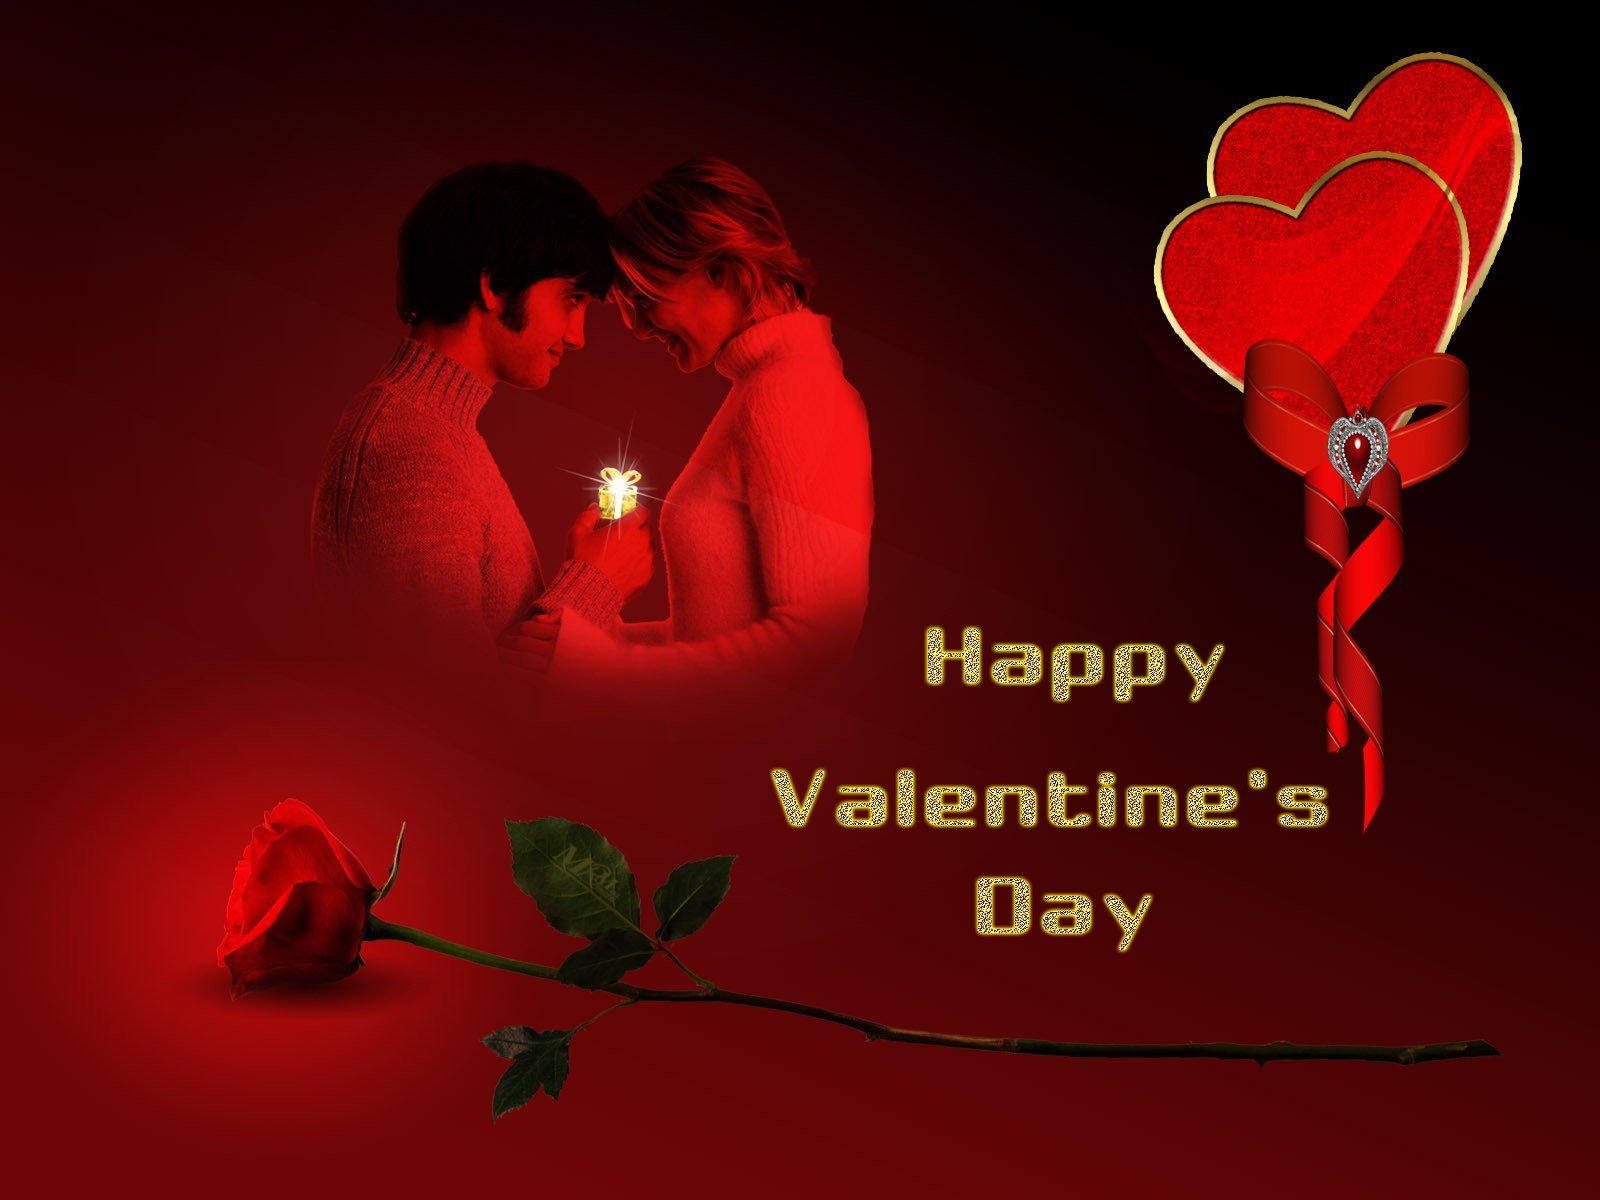 Happy Valentines Day Wallpaper Happy Valentines Day Wallpapers